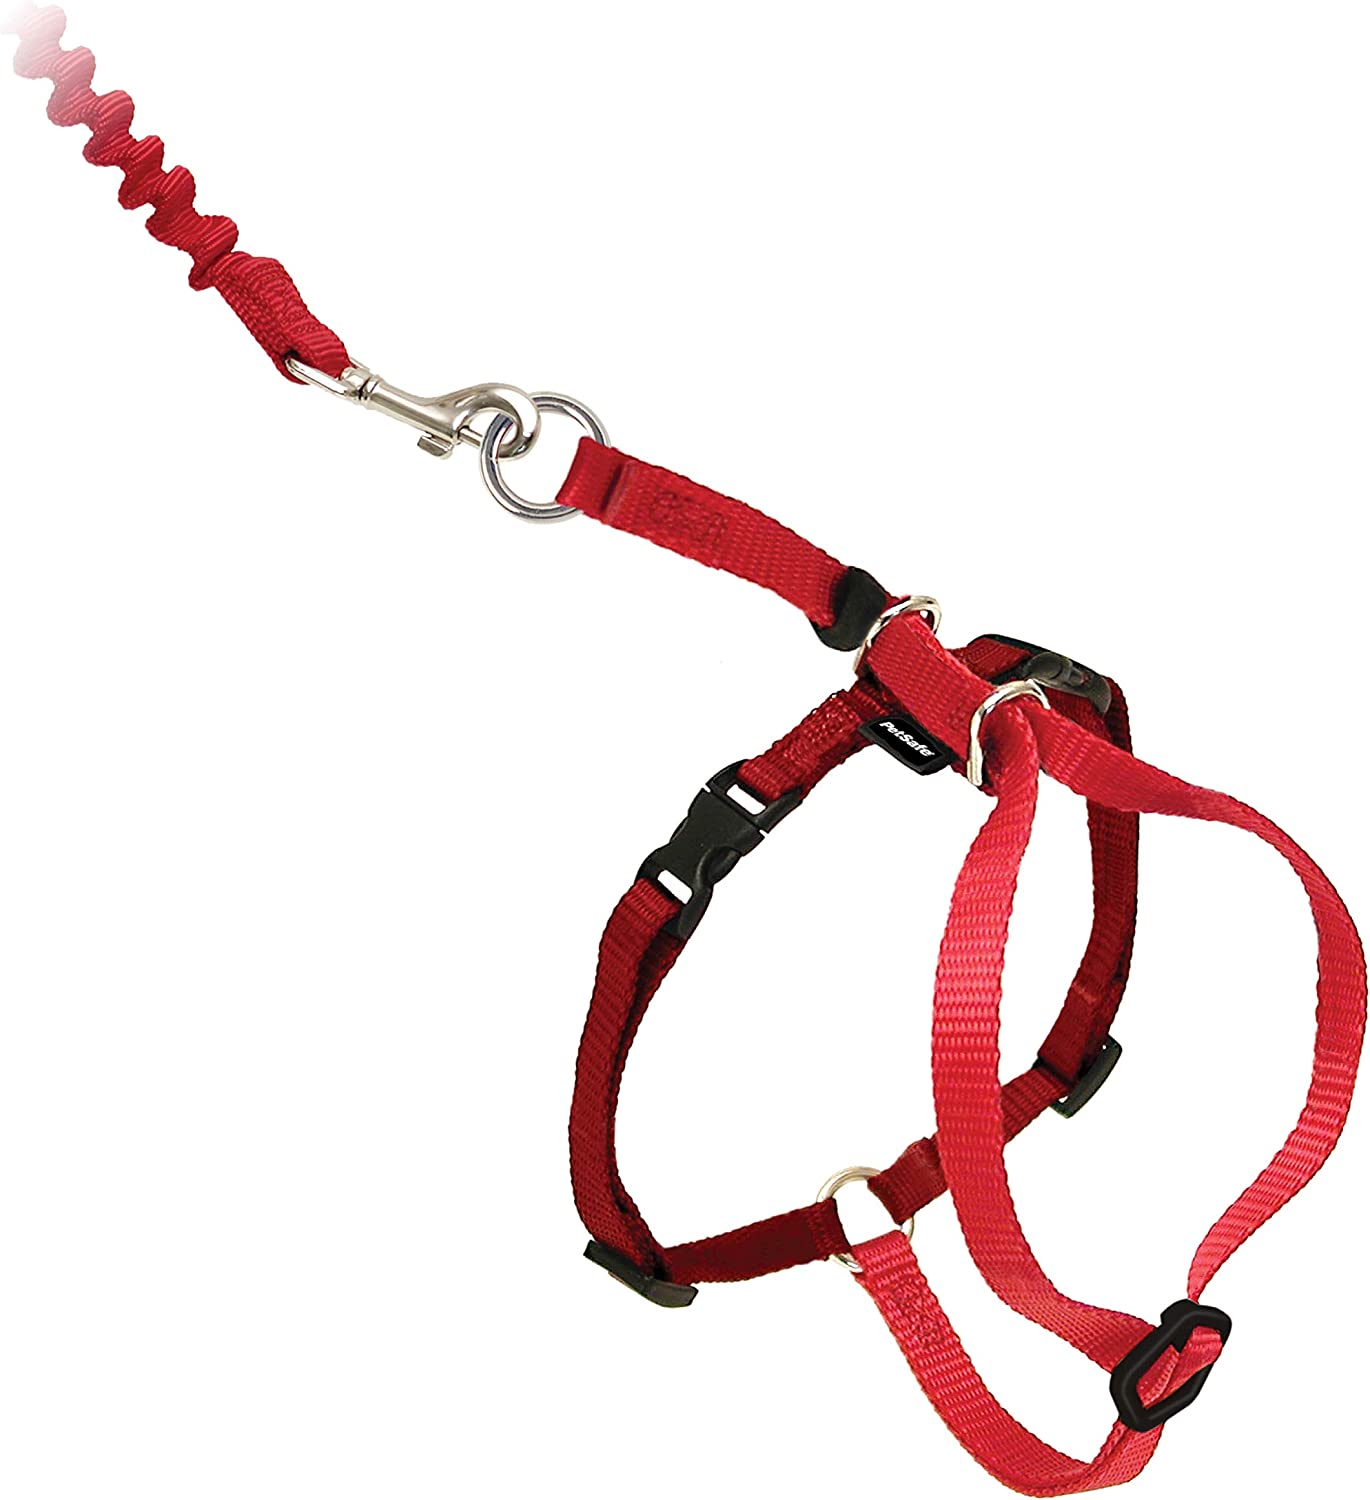 PetSafe Come with Me Kitty Harness and Bungee Leash, Red/Cranberry